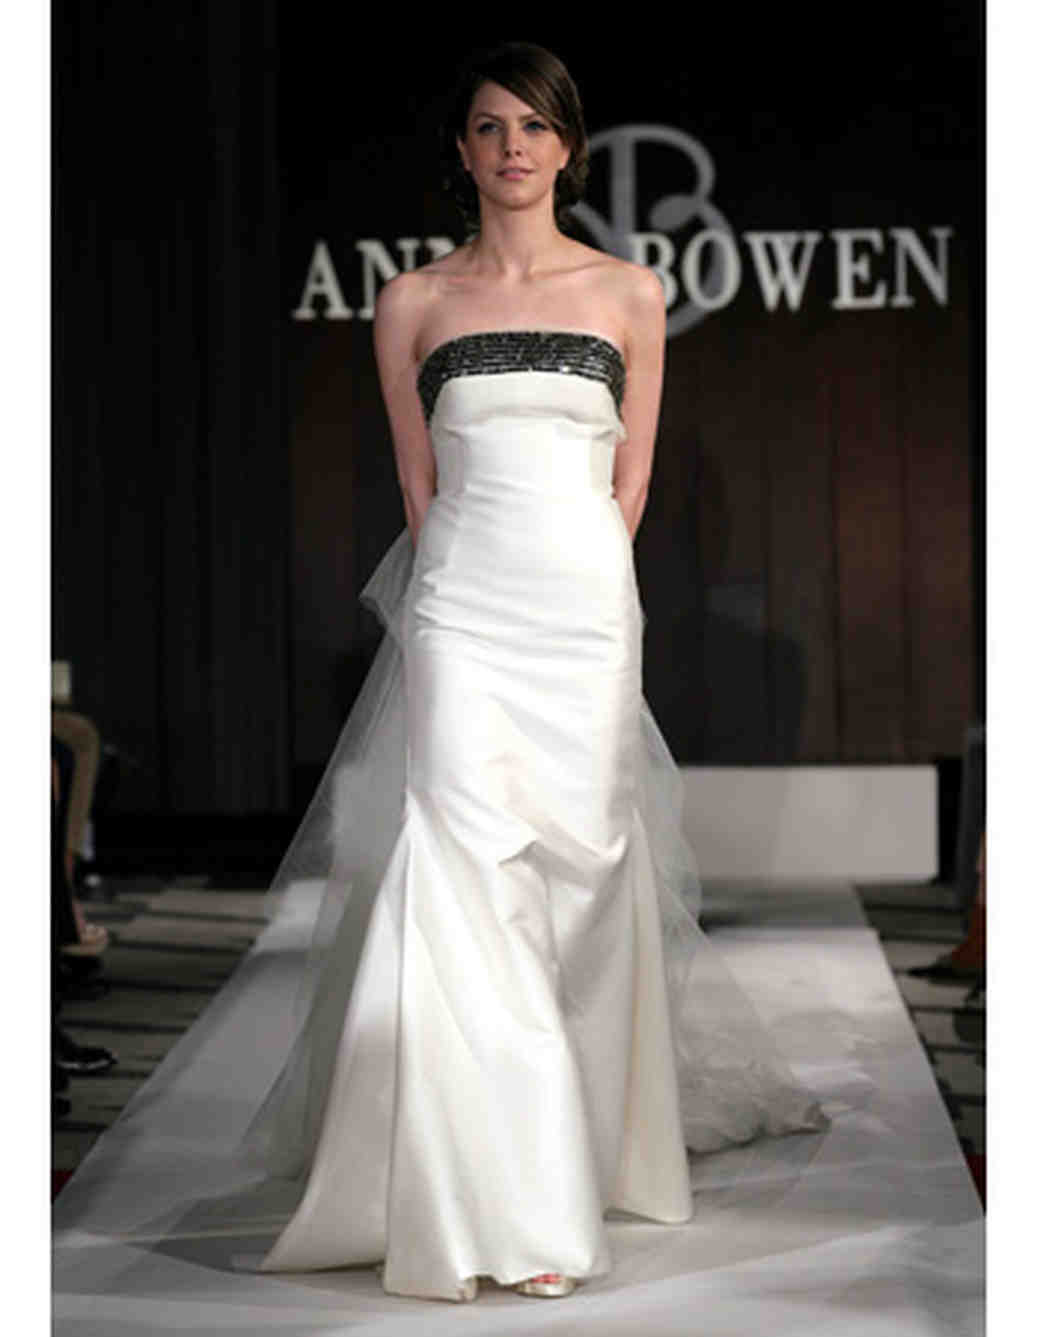  Wedding  Dresses  with Black  Accents  from Spring 2012 Bridal  